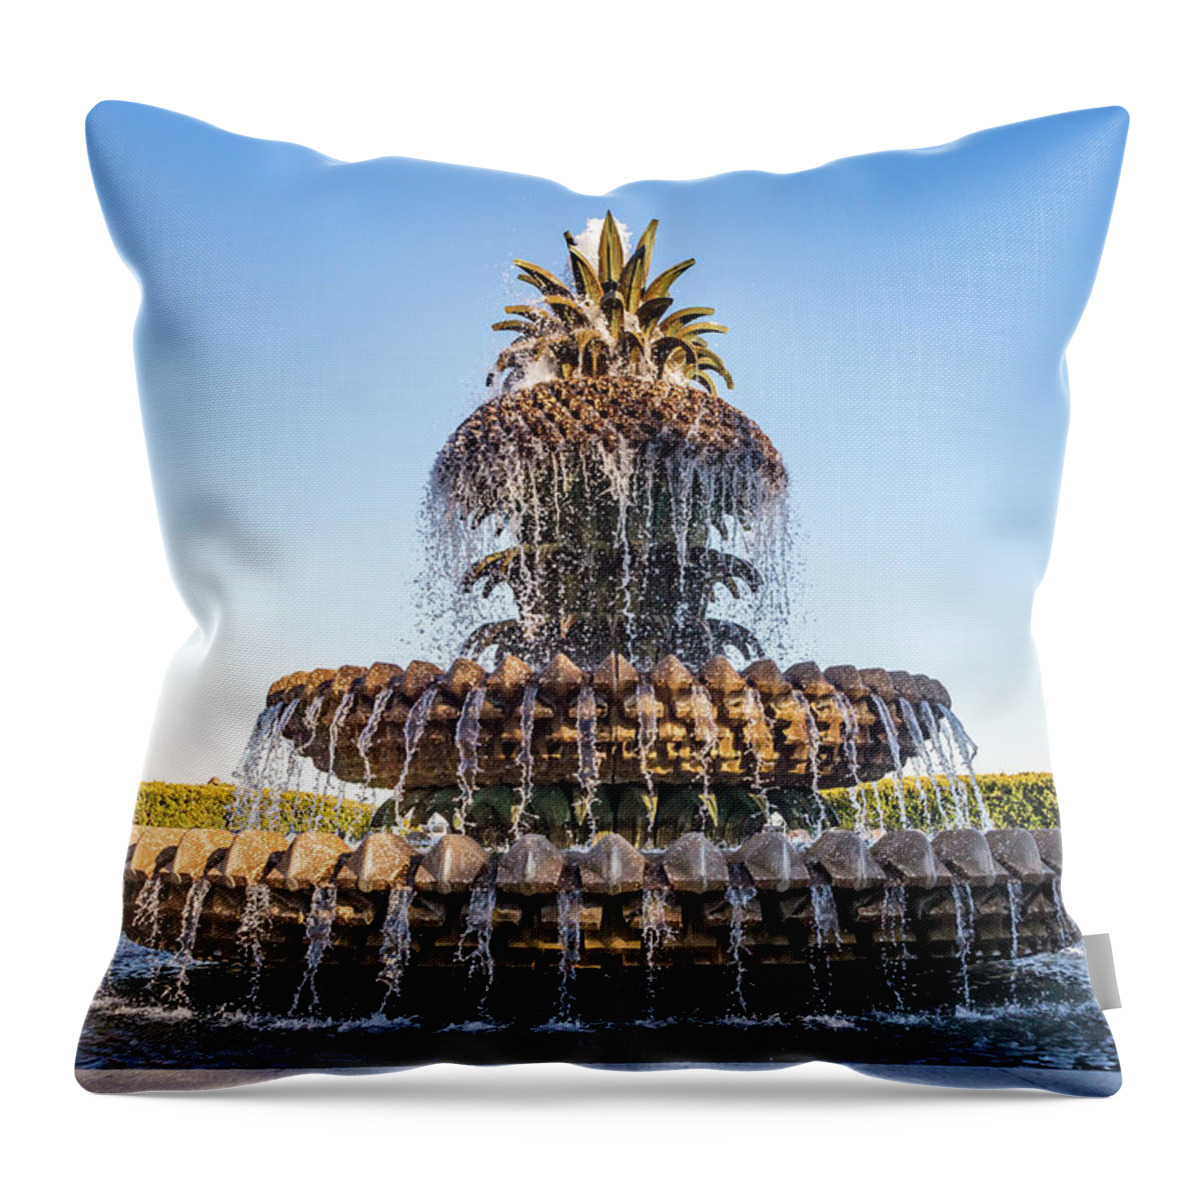 South Carolina Throw Pillow featuring the photograph Pineapple Fountain by Framing Places